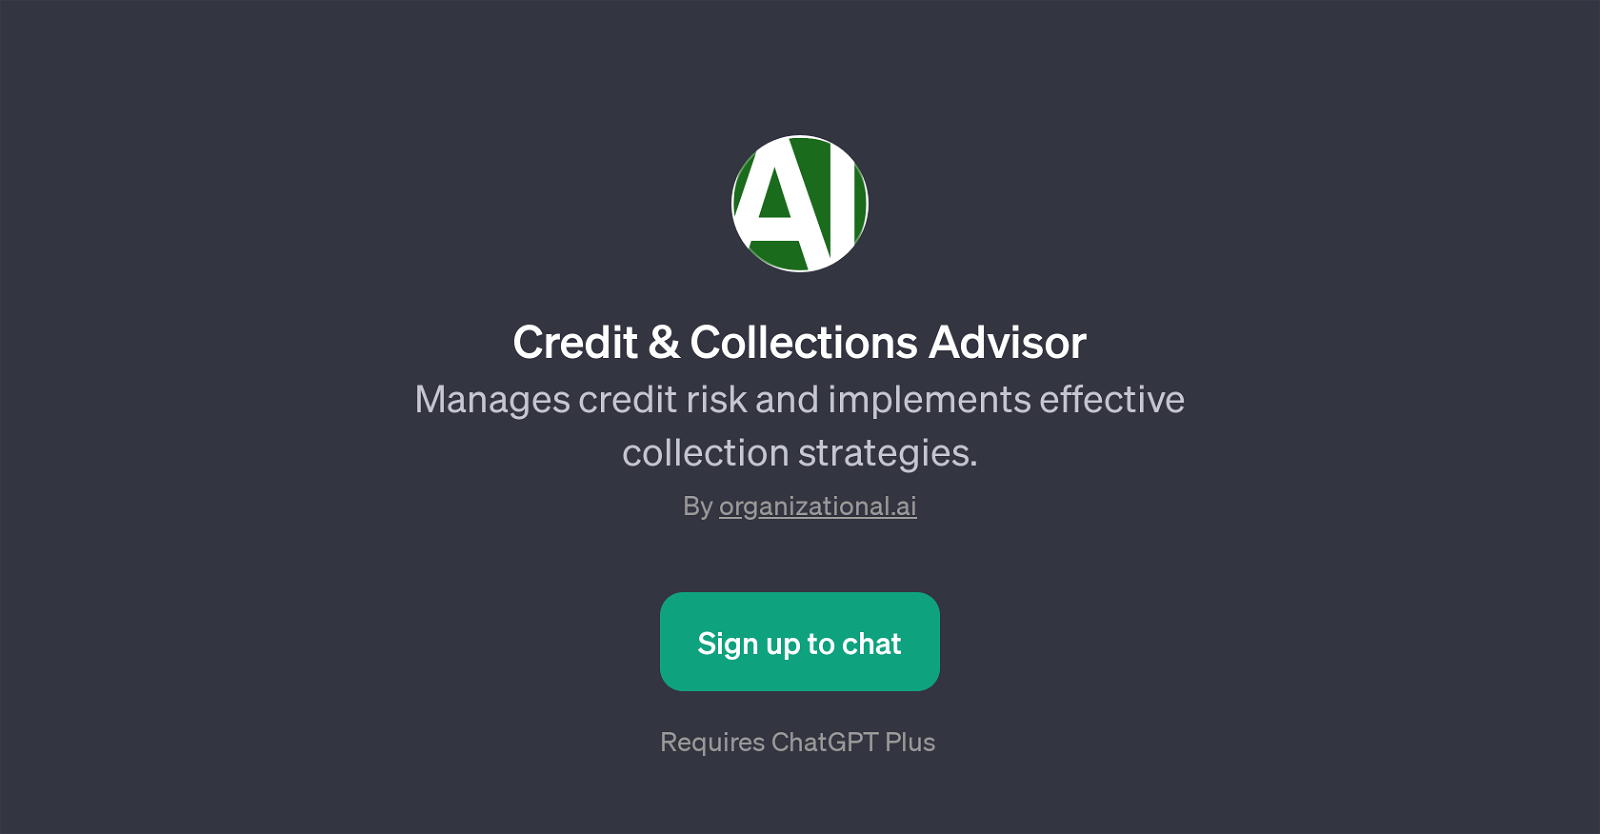 Credit & Collections Advisor website